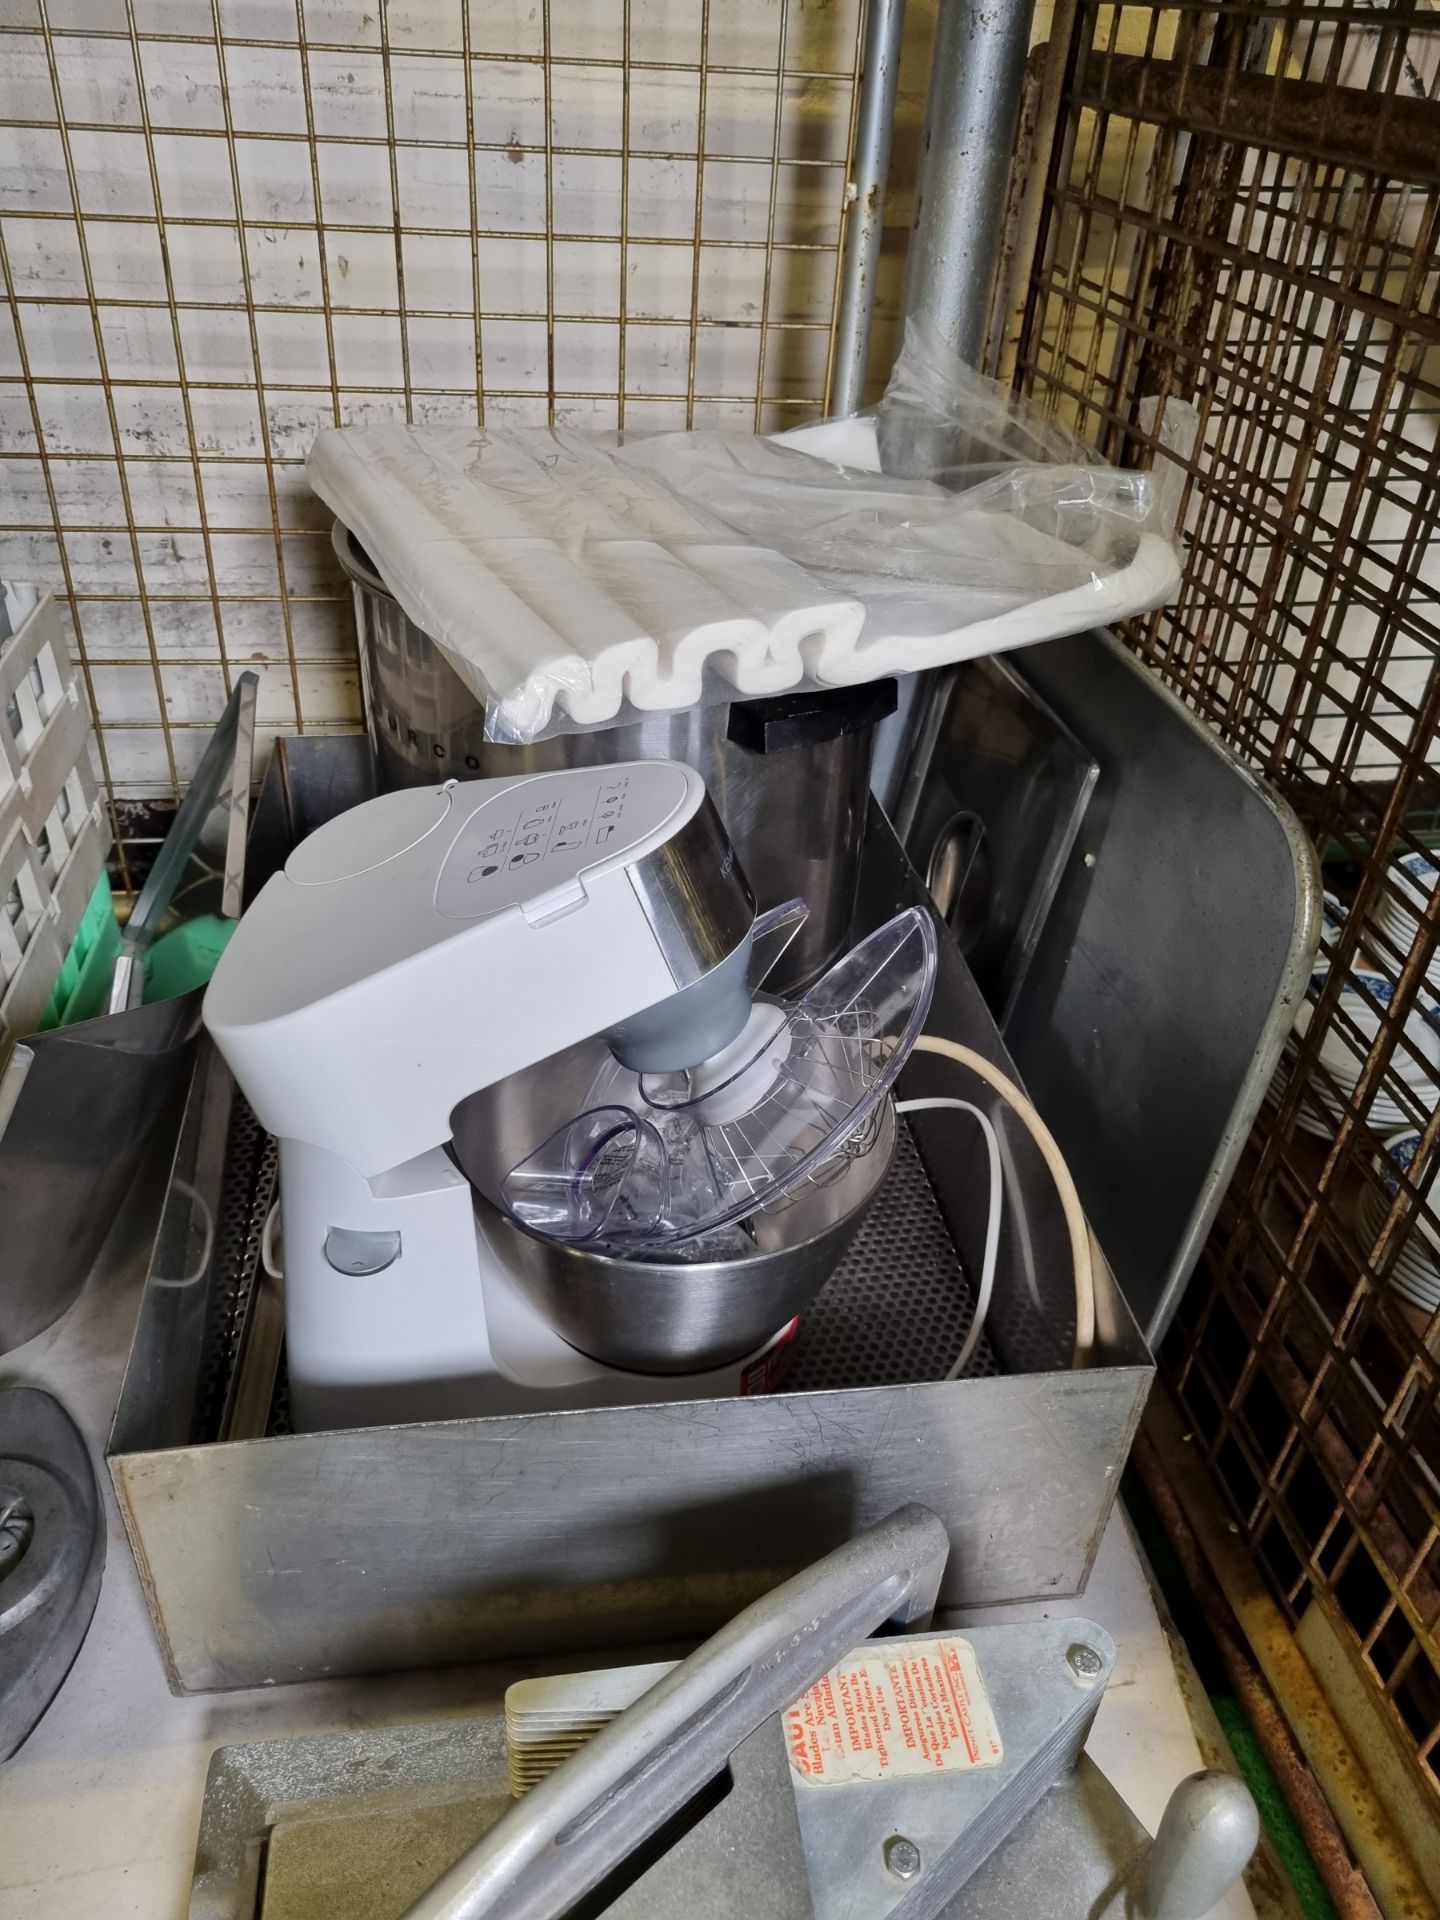 Catering equipment - dishwasher trays, food steamers, small mixer, tomato slicer, blender jug - Image 4 of 7